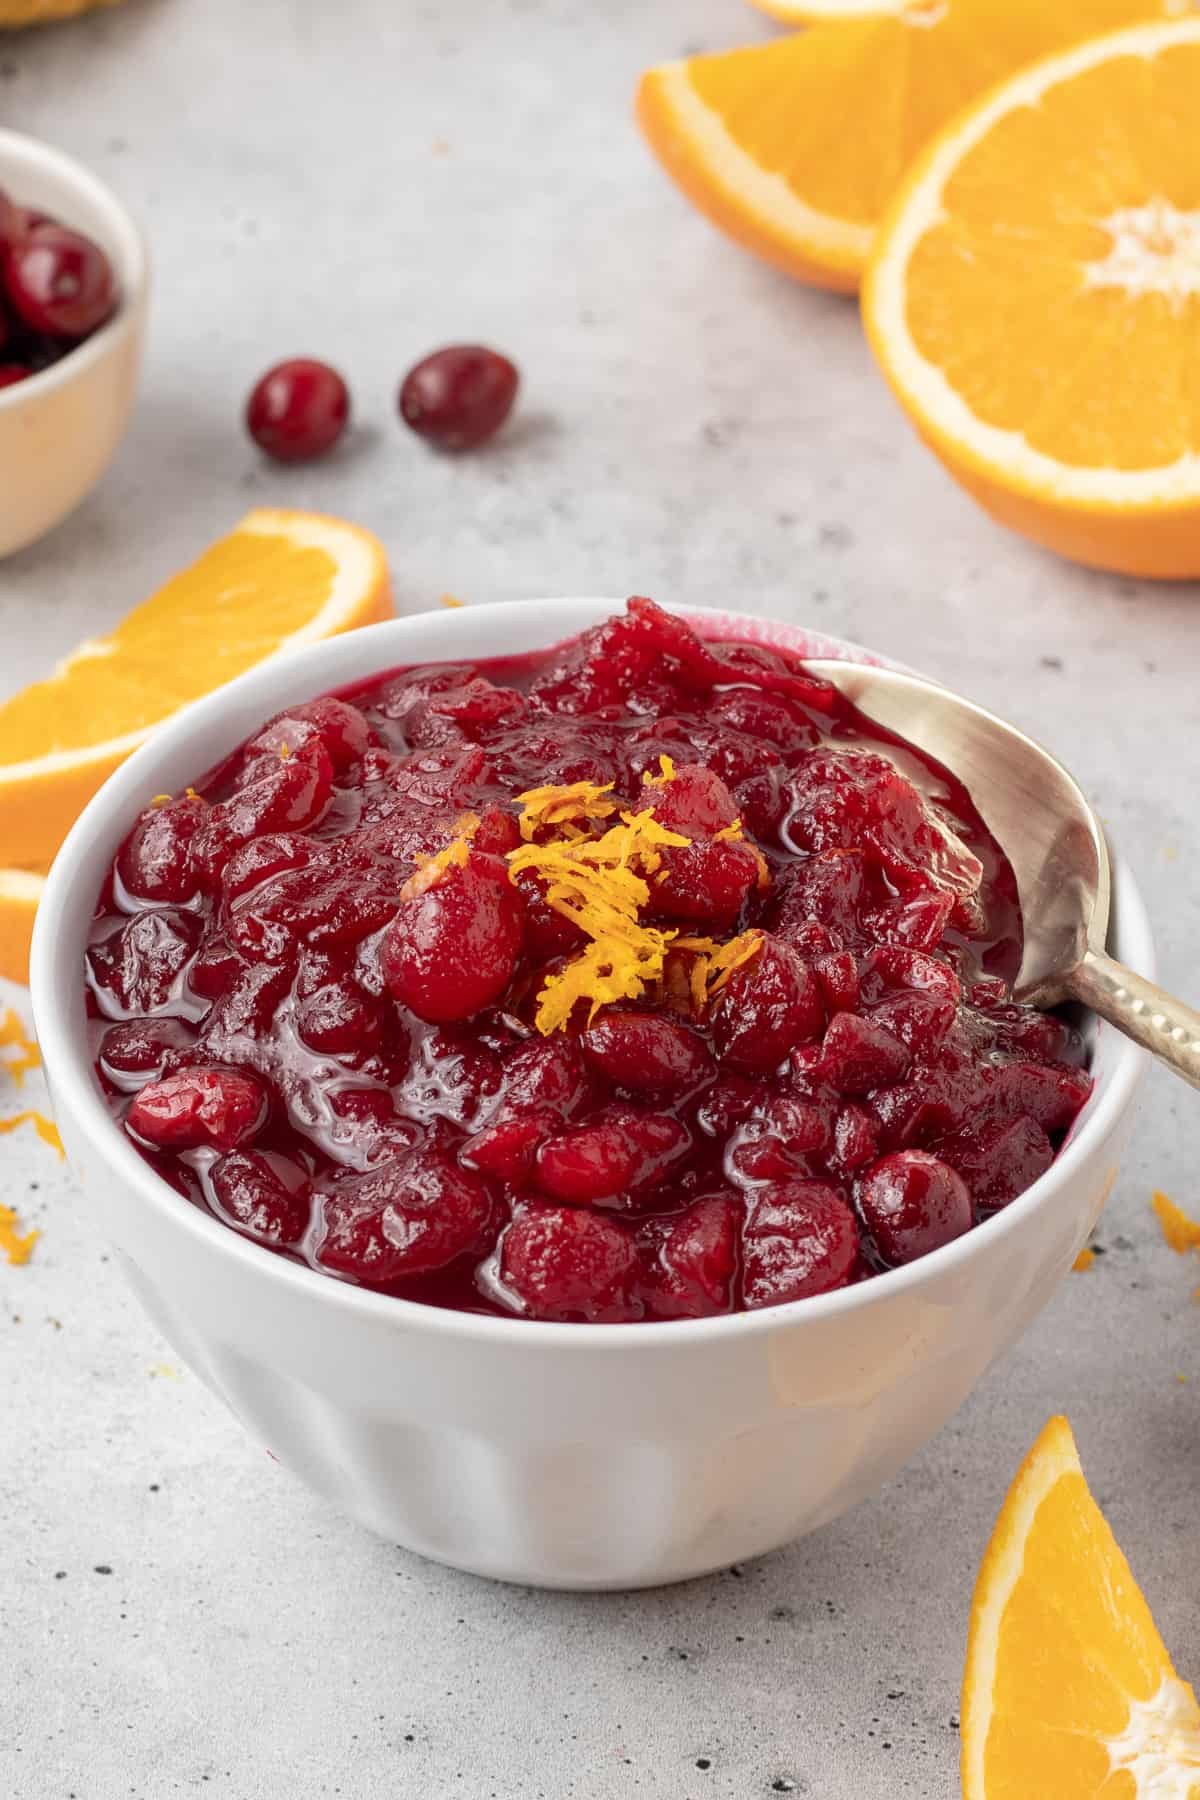 A spoon resting in a white bowl filled with cranberry sauce.